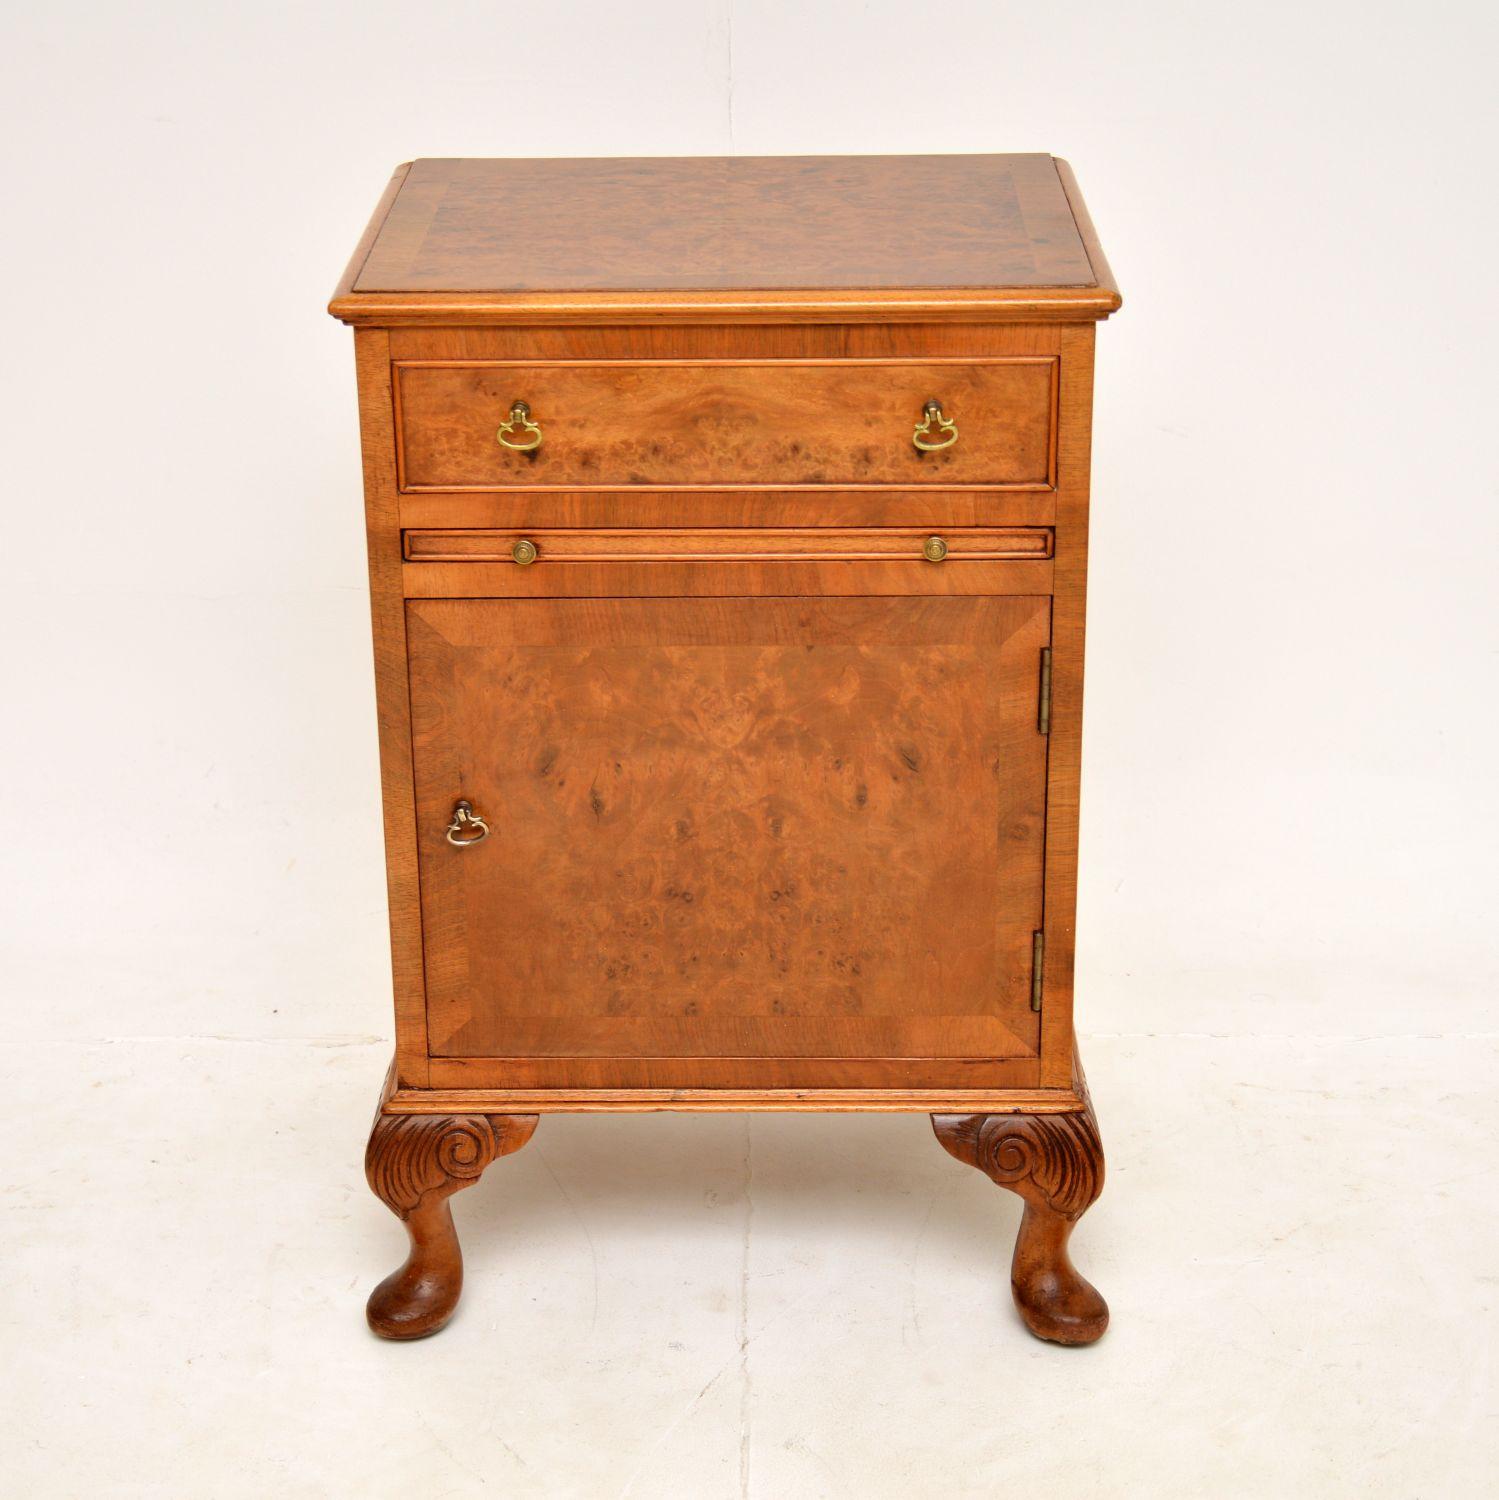 A beautiful antique cabinet in walnut, which could be used as a bedside cabinet or in other places in the home. This was made in England, it dates from around the 1930’s.

It is of superb quality and is a very useful size. The colour tones and